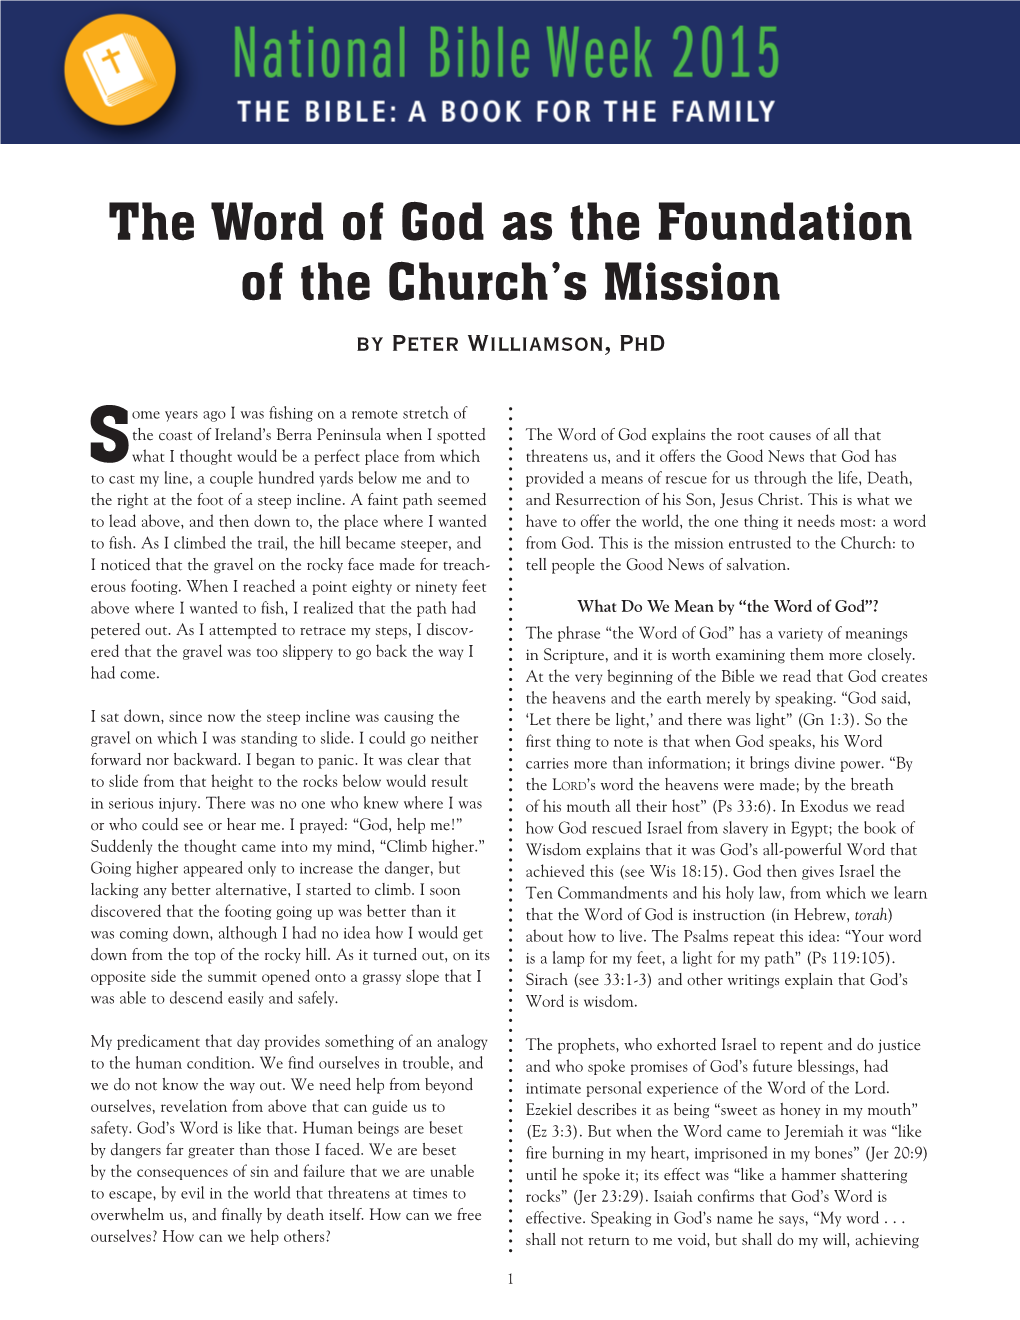 The Word of God As the Foundation of the Church's Mission